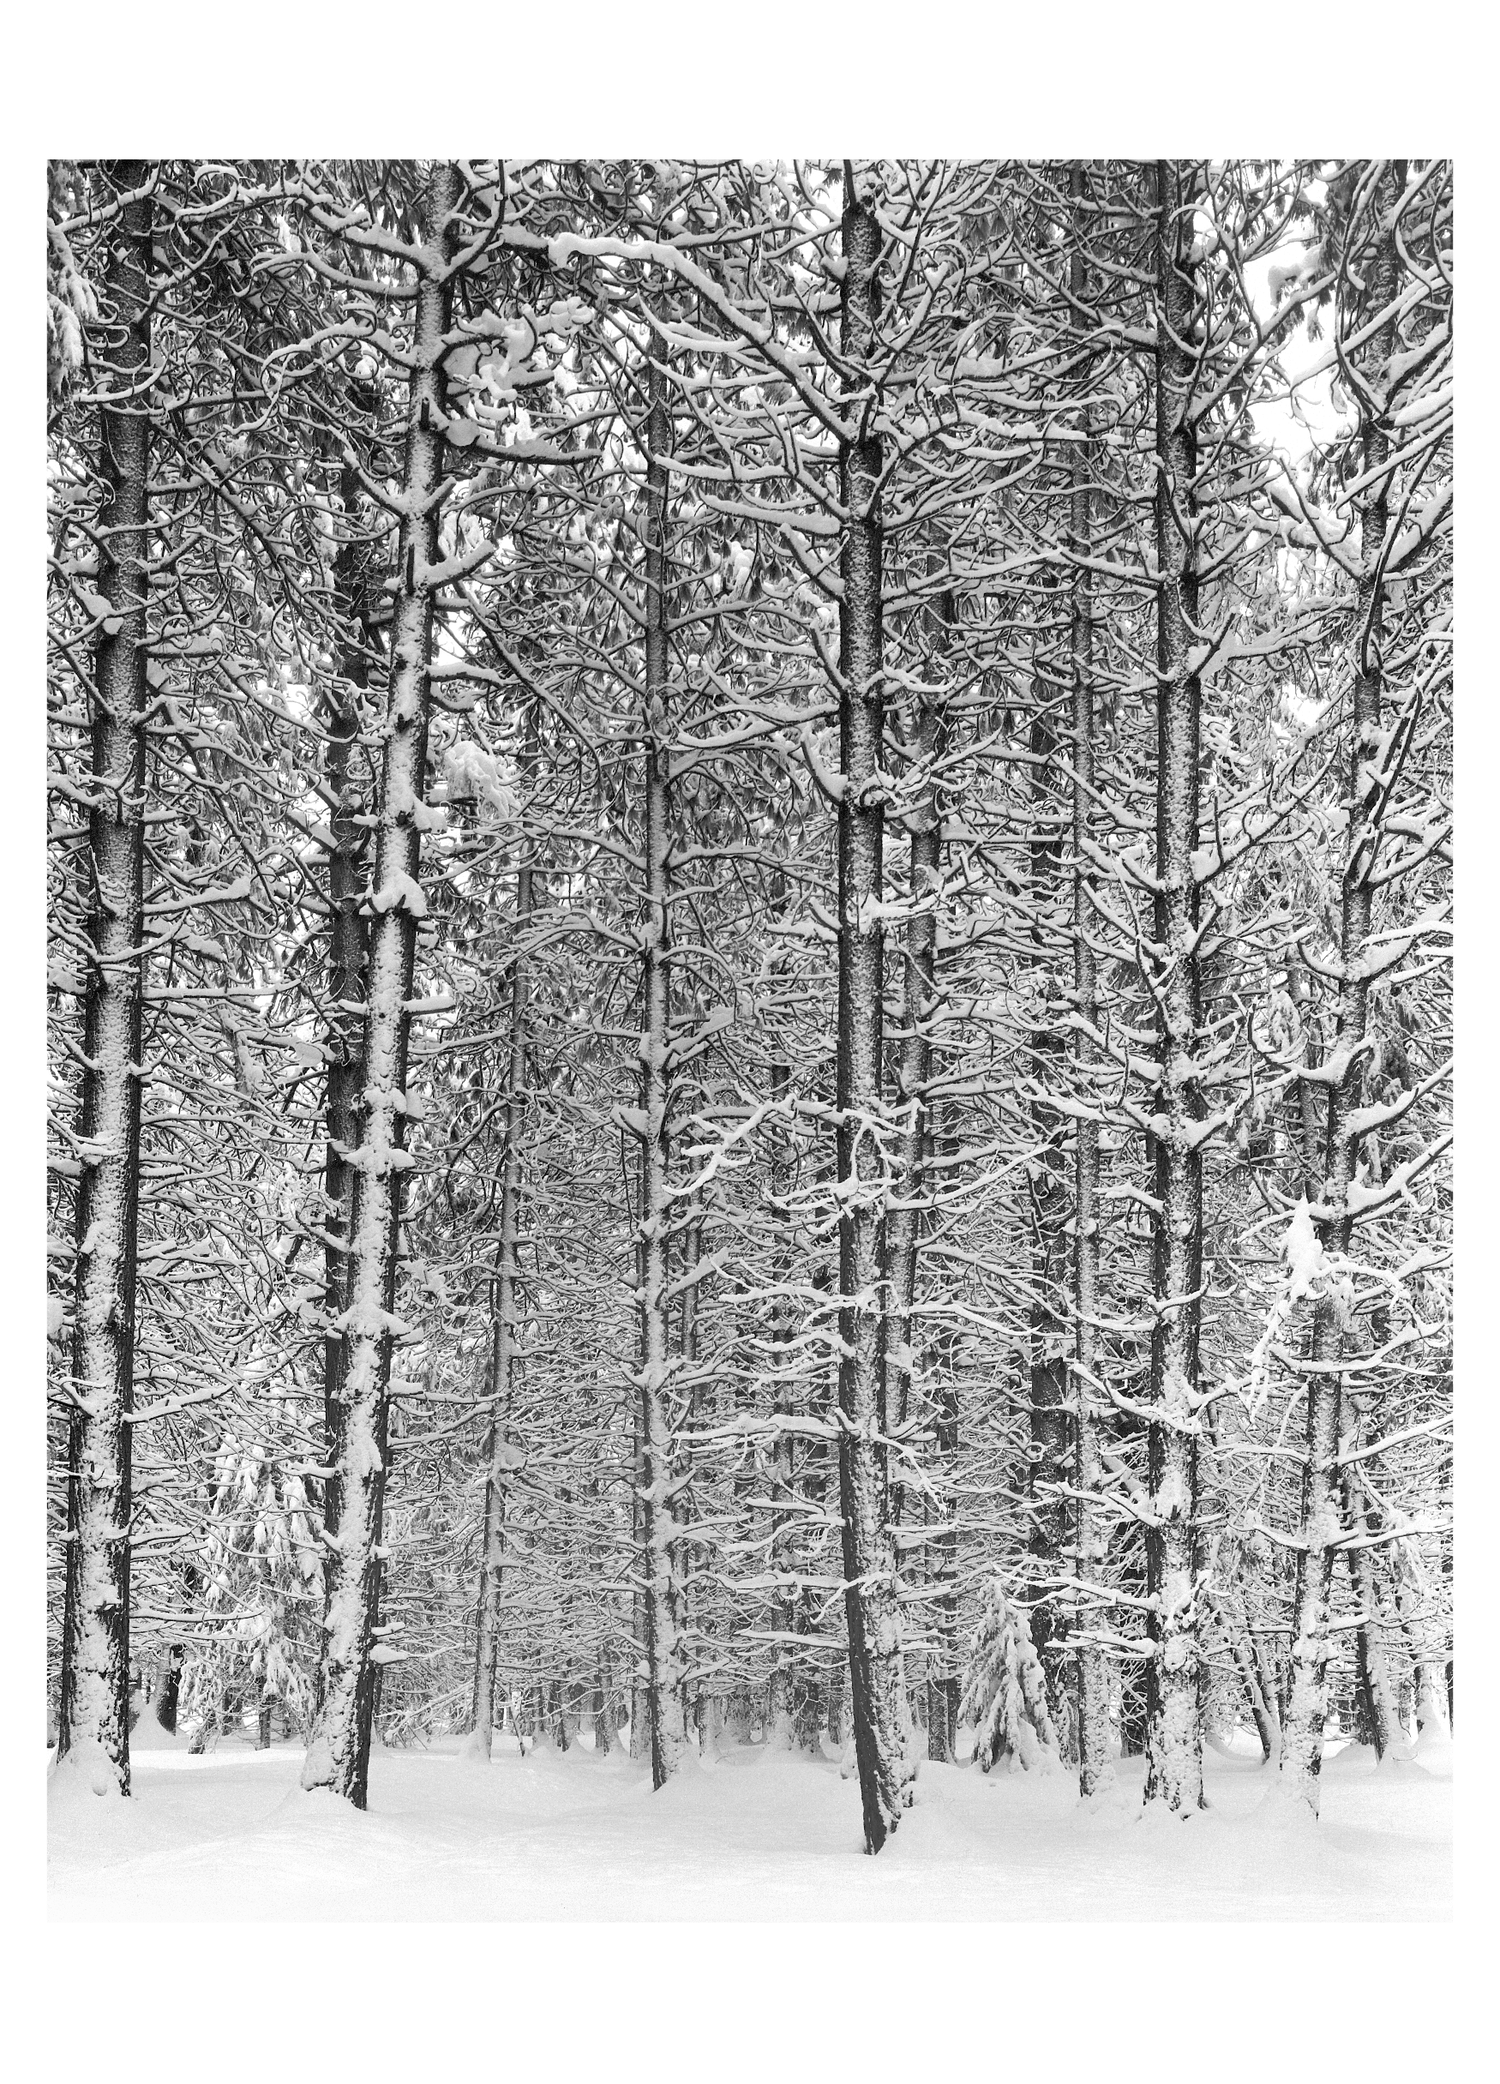 PINE FOREST IN SNOW - ANSEL ADAMS SMALL MATTED REPRODUCTION